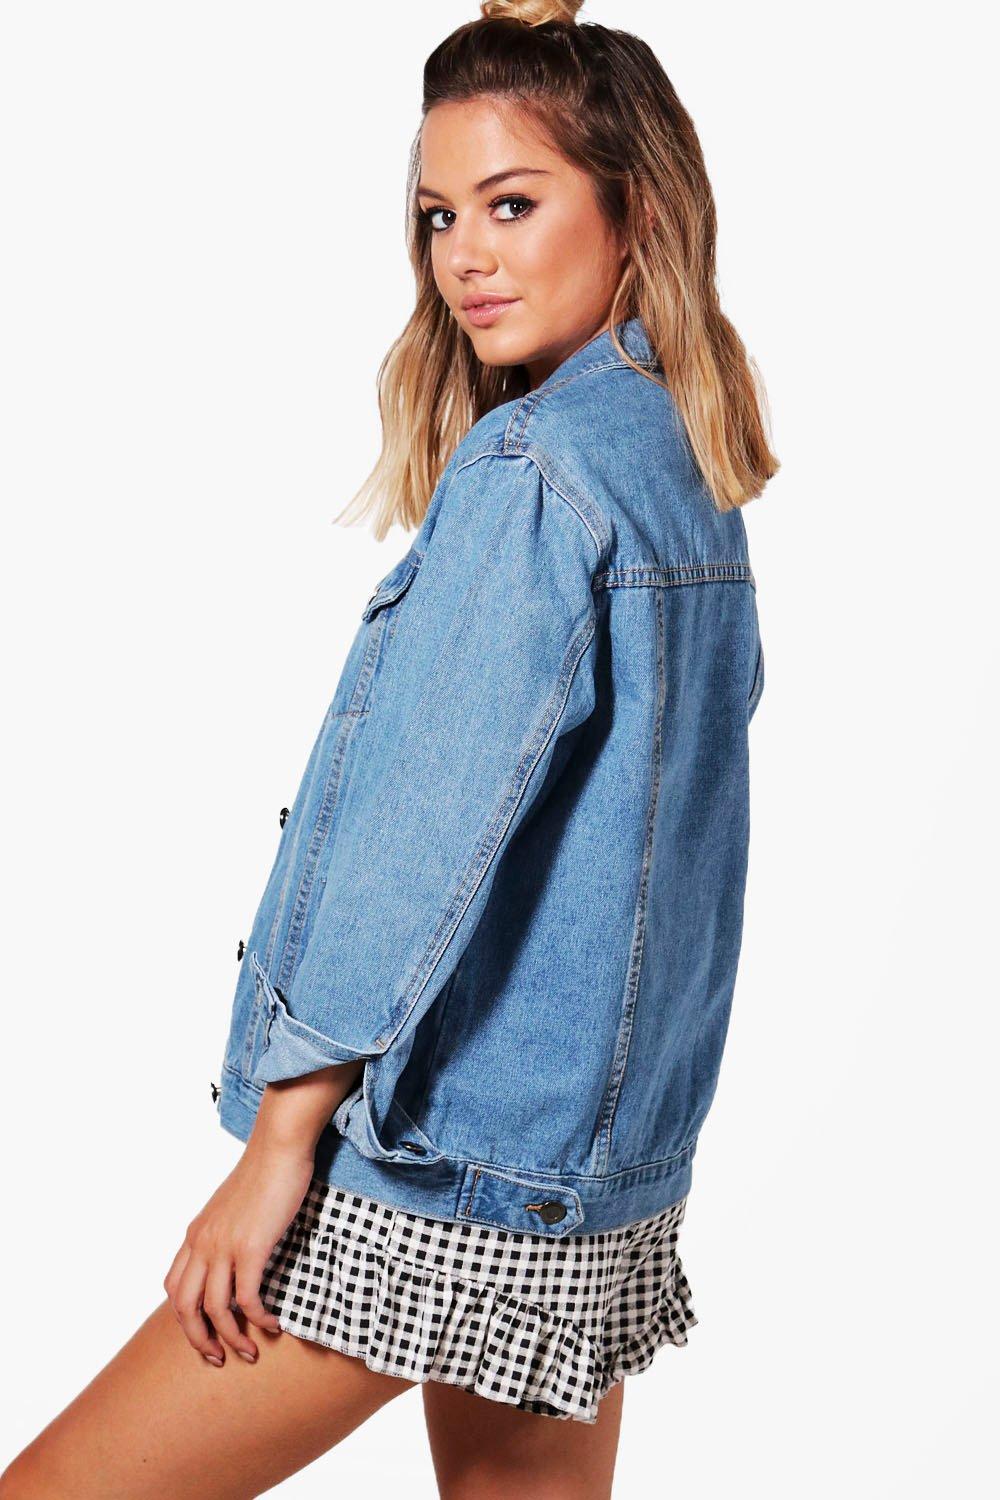 Women's blue denim jacket with long sleeves and a collared neckline, showcased on a female model standing with a side view